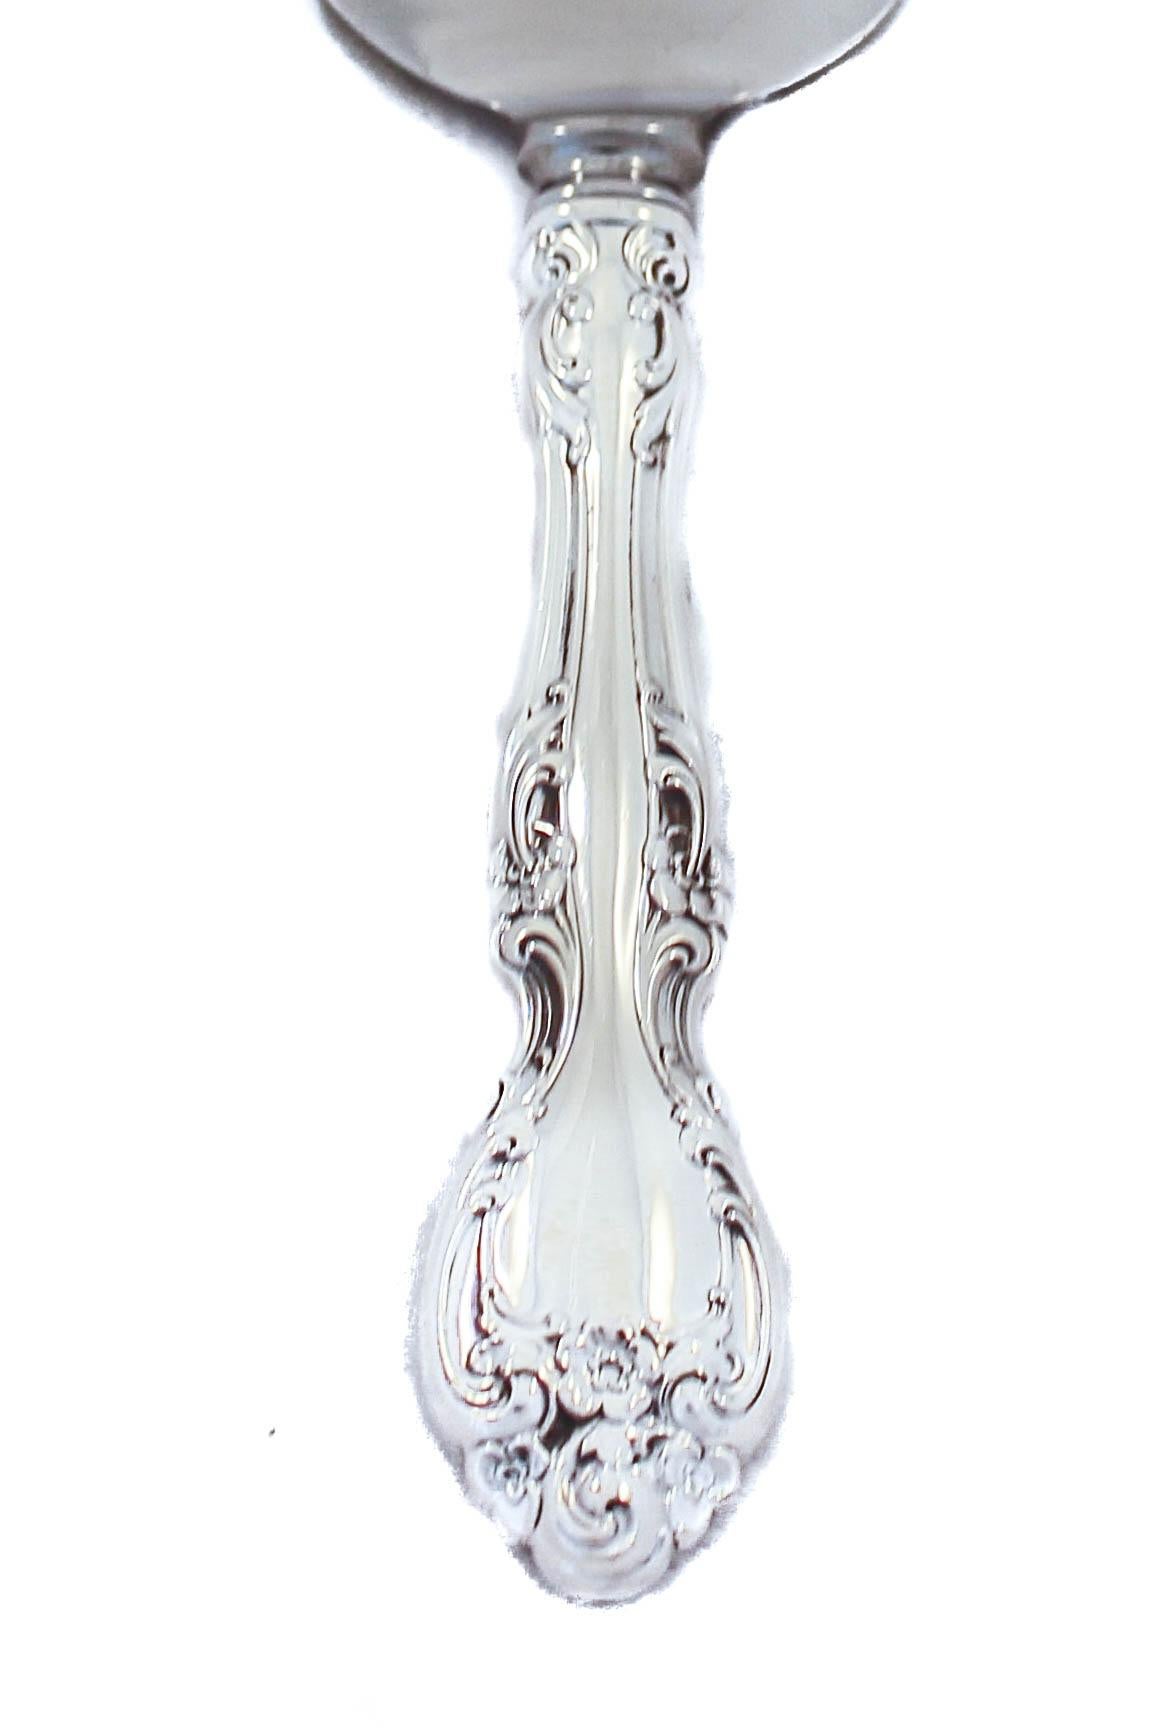 Being offered is a sterling silver server in the Lorraine pattern by Gorham Silversmiths. The handle is scalloped and has flowers around the top and sides. Great for desserts or anything else you want to serve.